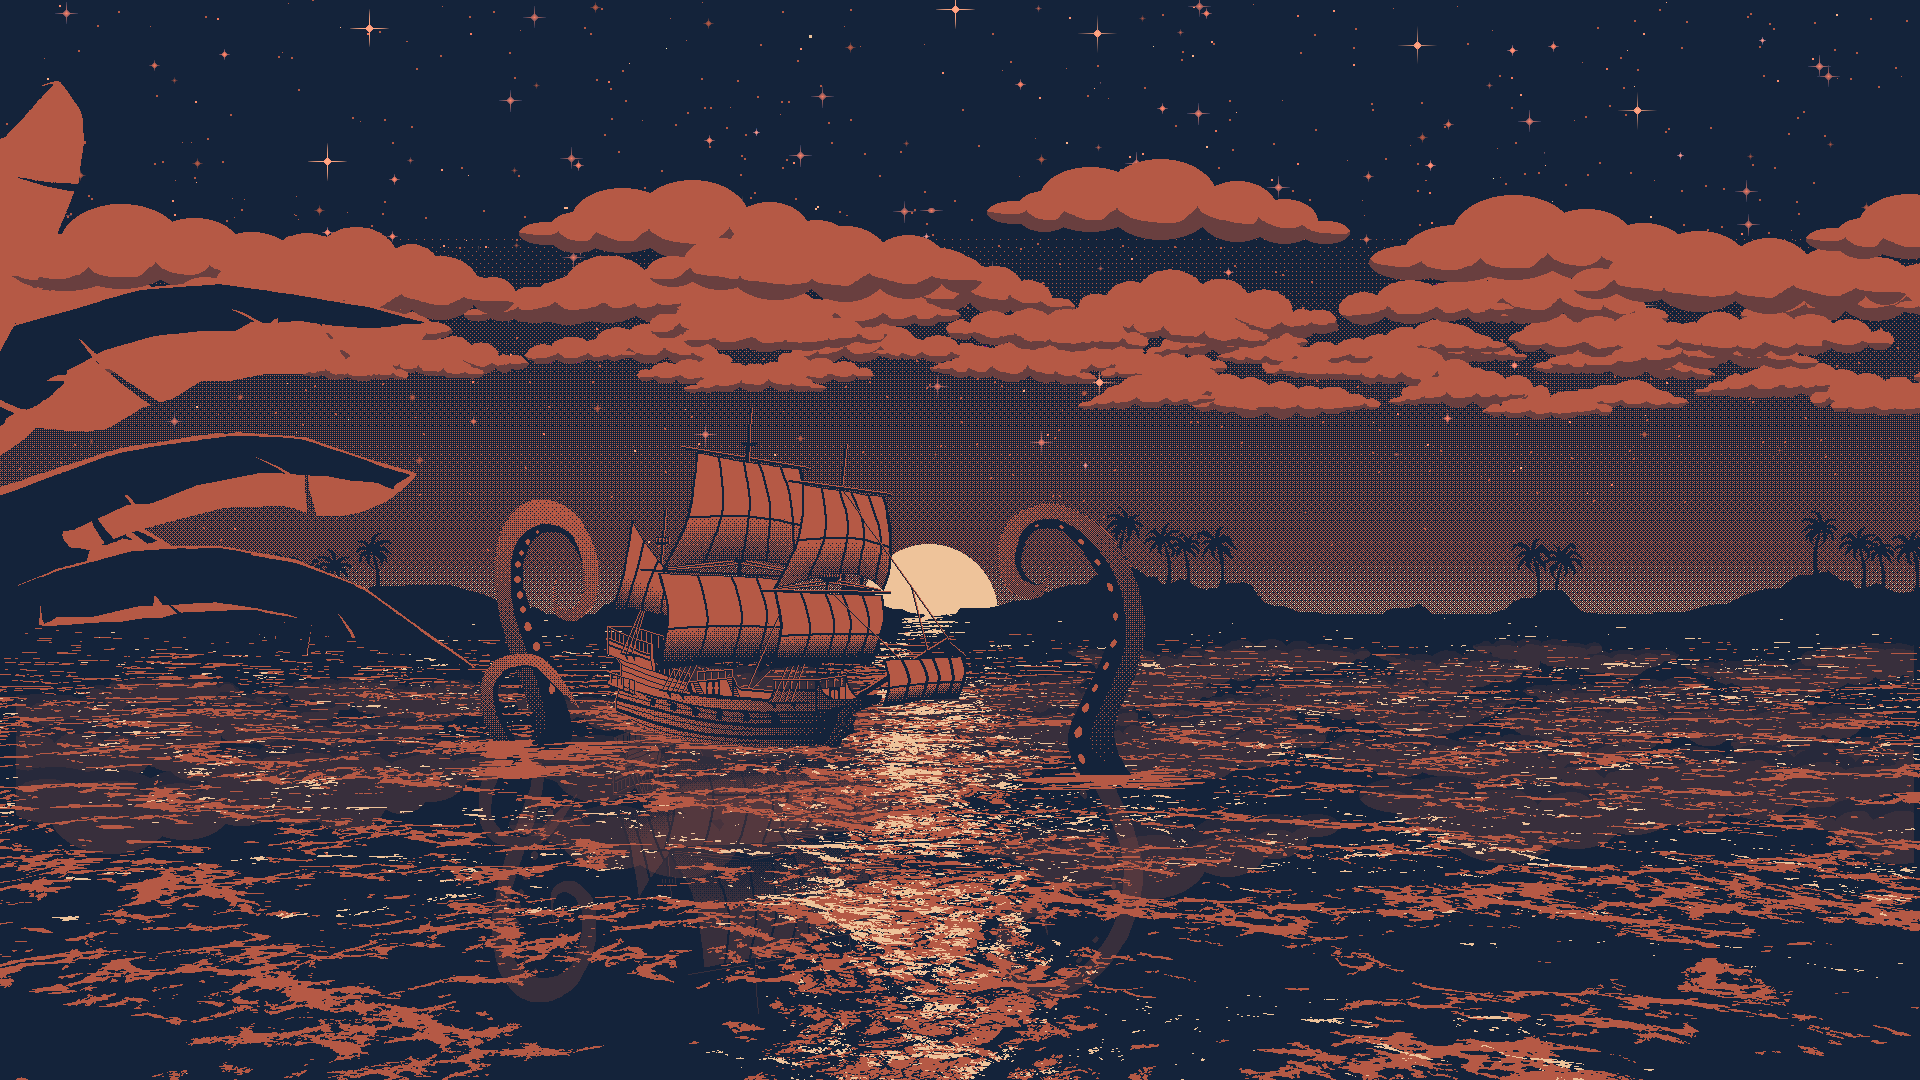 A ship sails through the sea with a giant octopus - Pixel art